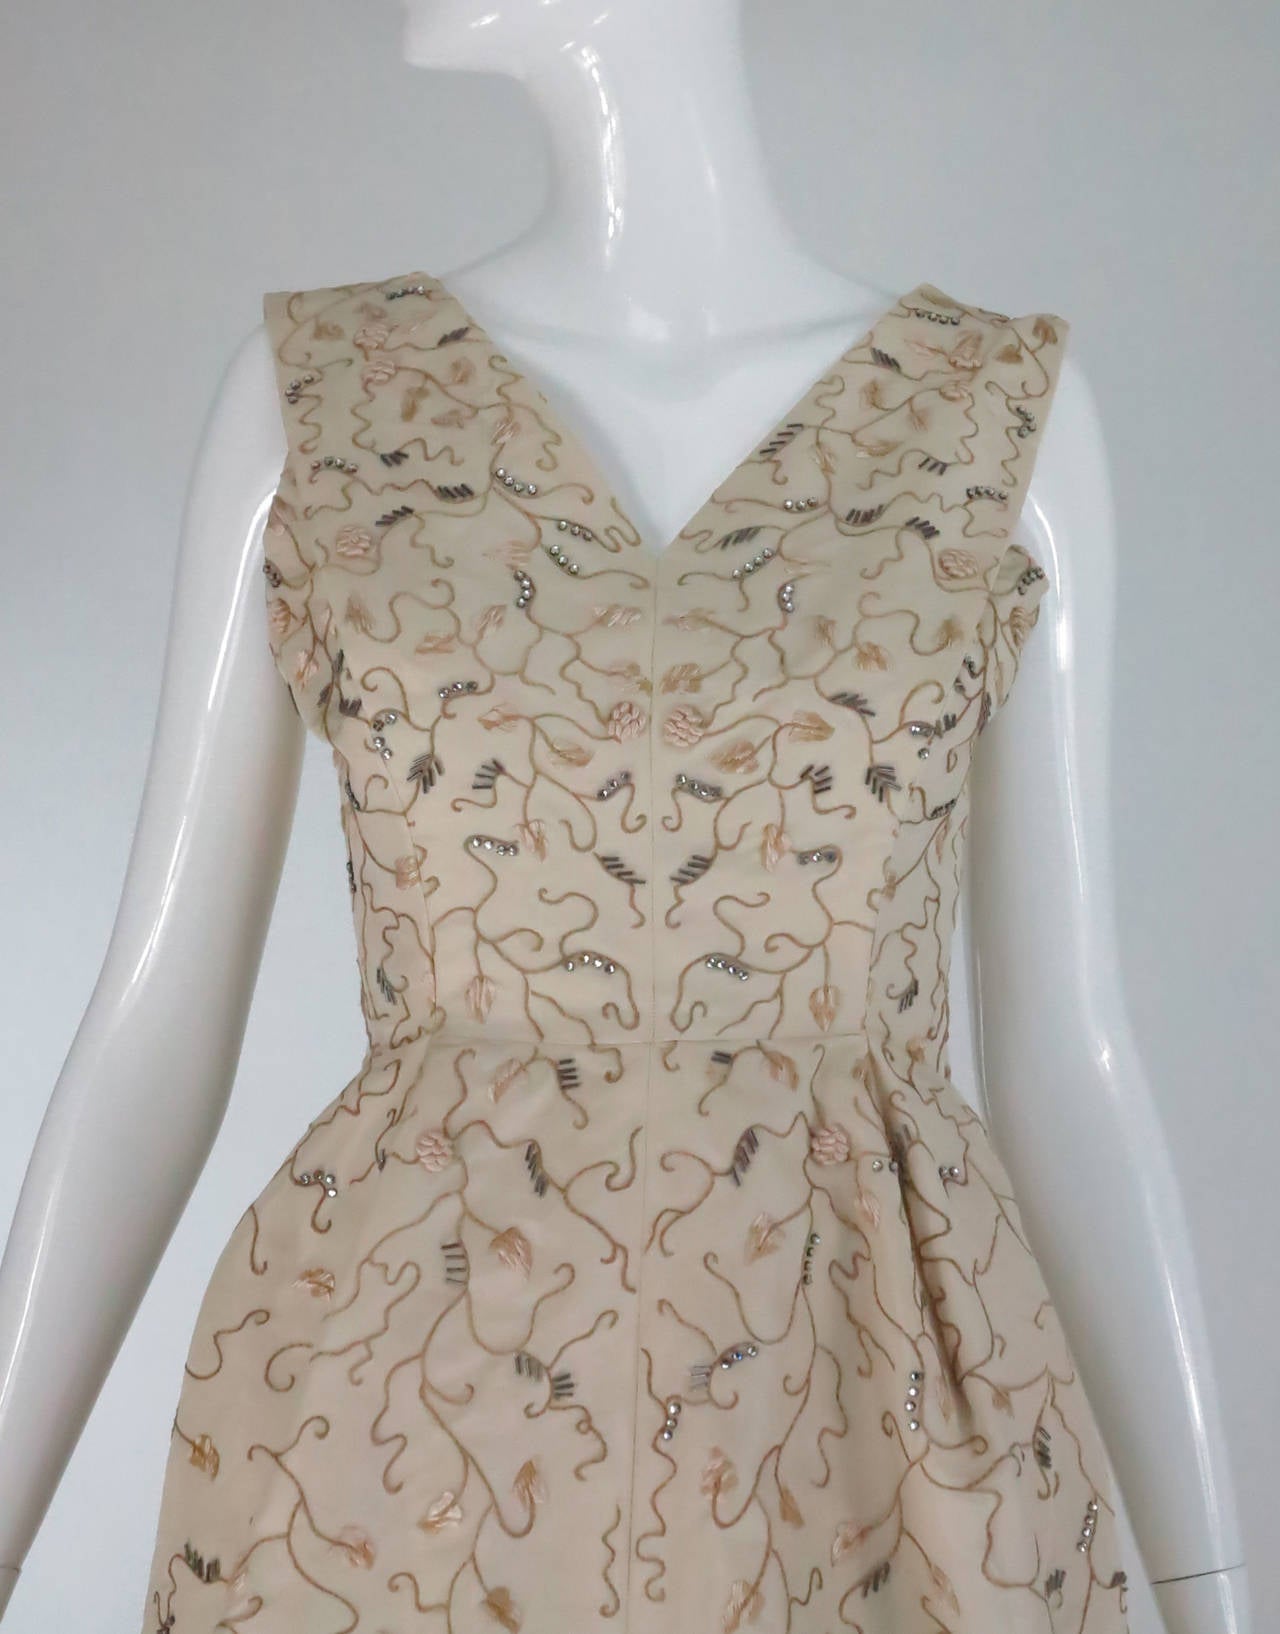 From the late 1950s a gorgeous Hattie Carnegie beaded & embroidered silk faille cocktail dress in ivory white...Foliate embroidery is done in gold silk thread with scattered three dimensional embroidered roundels, there are silver glass bugle beads